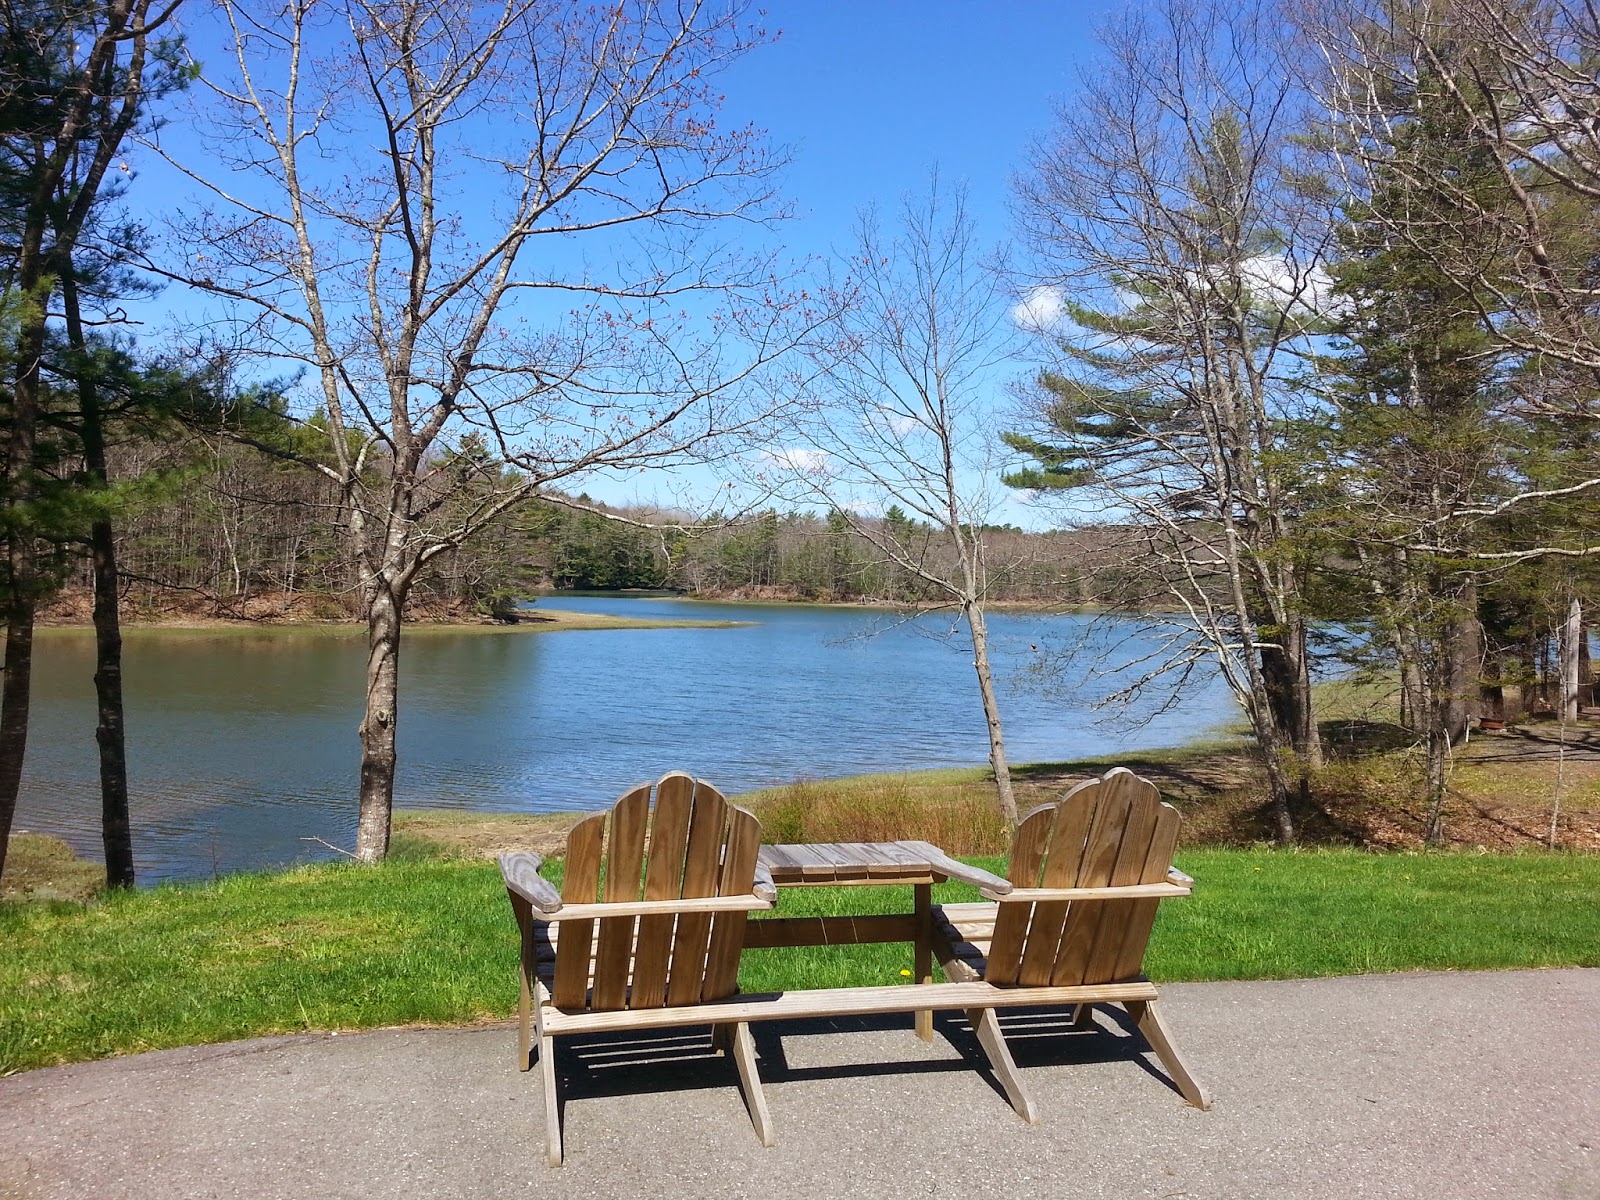 RVAGOGO RV Park Review Shore Hills Campground and RV Park (Boothbay, Maine)